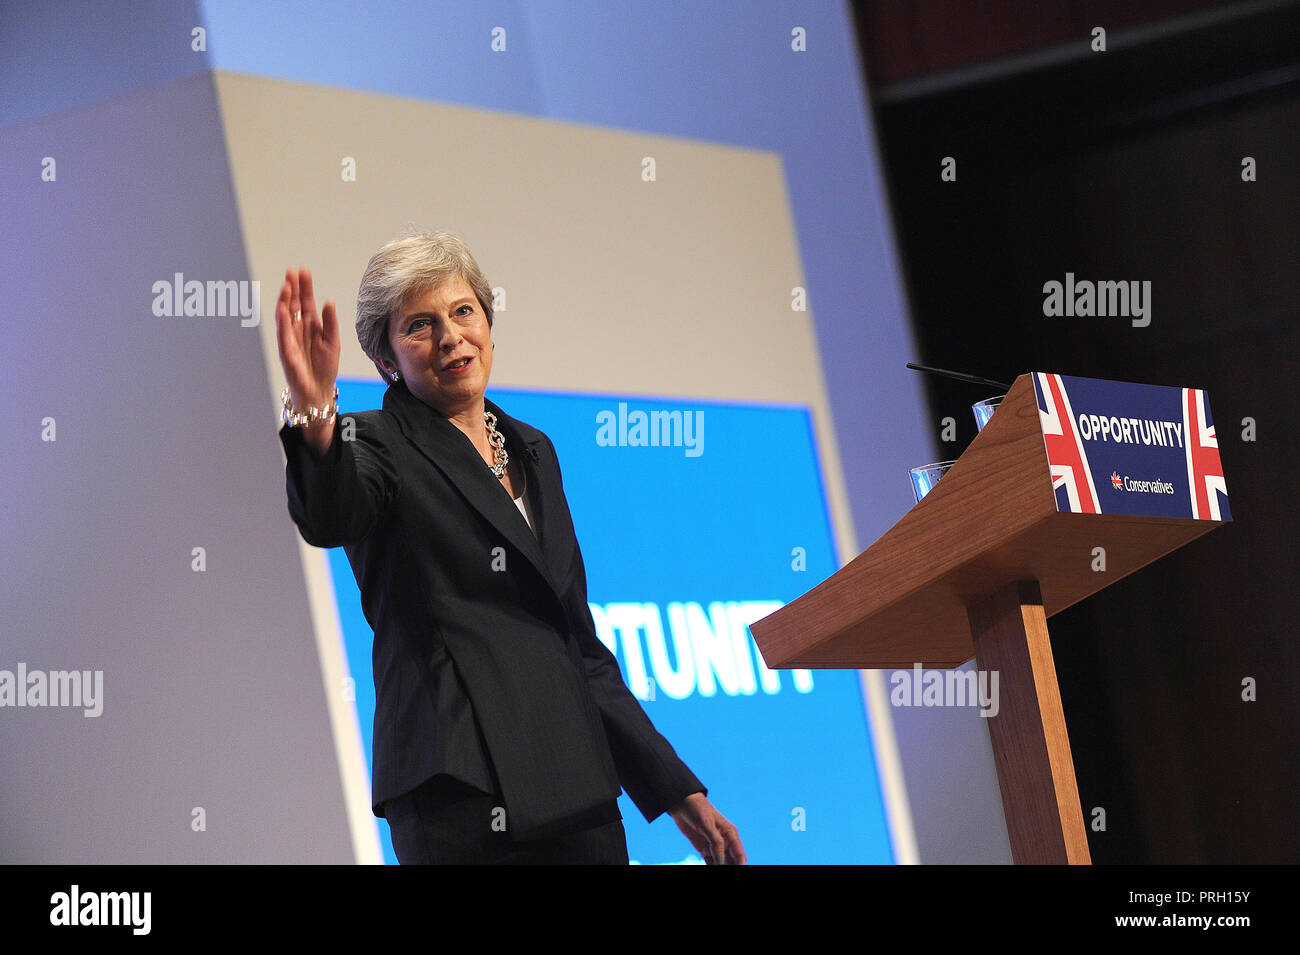 Birmingham, England. 3rd October, 2018.  Theresa May MP, Prime Minister and Leader of the Conservative Party, waves to the audience following her keynote speech to conference on the closing session of the fourth day of the Conservative Party annual conference at the ICC.  Kevin Hayes/Alamy Live News Credit: Kevin Hayes/Alamy Live News Stock Photo